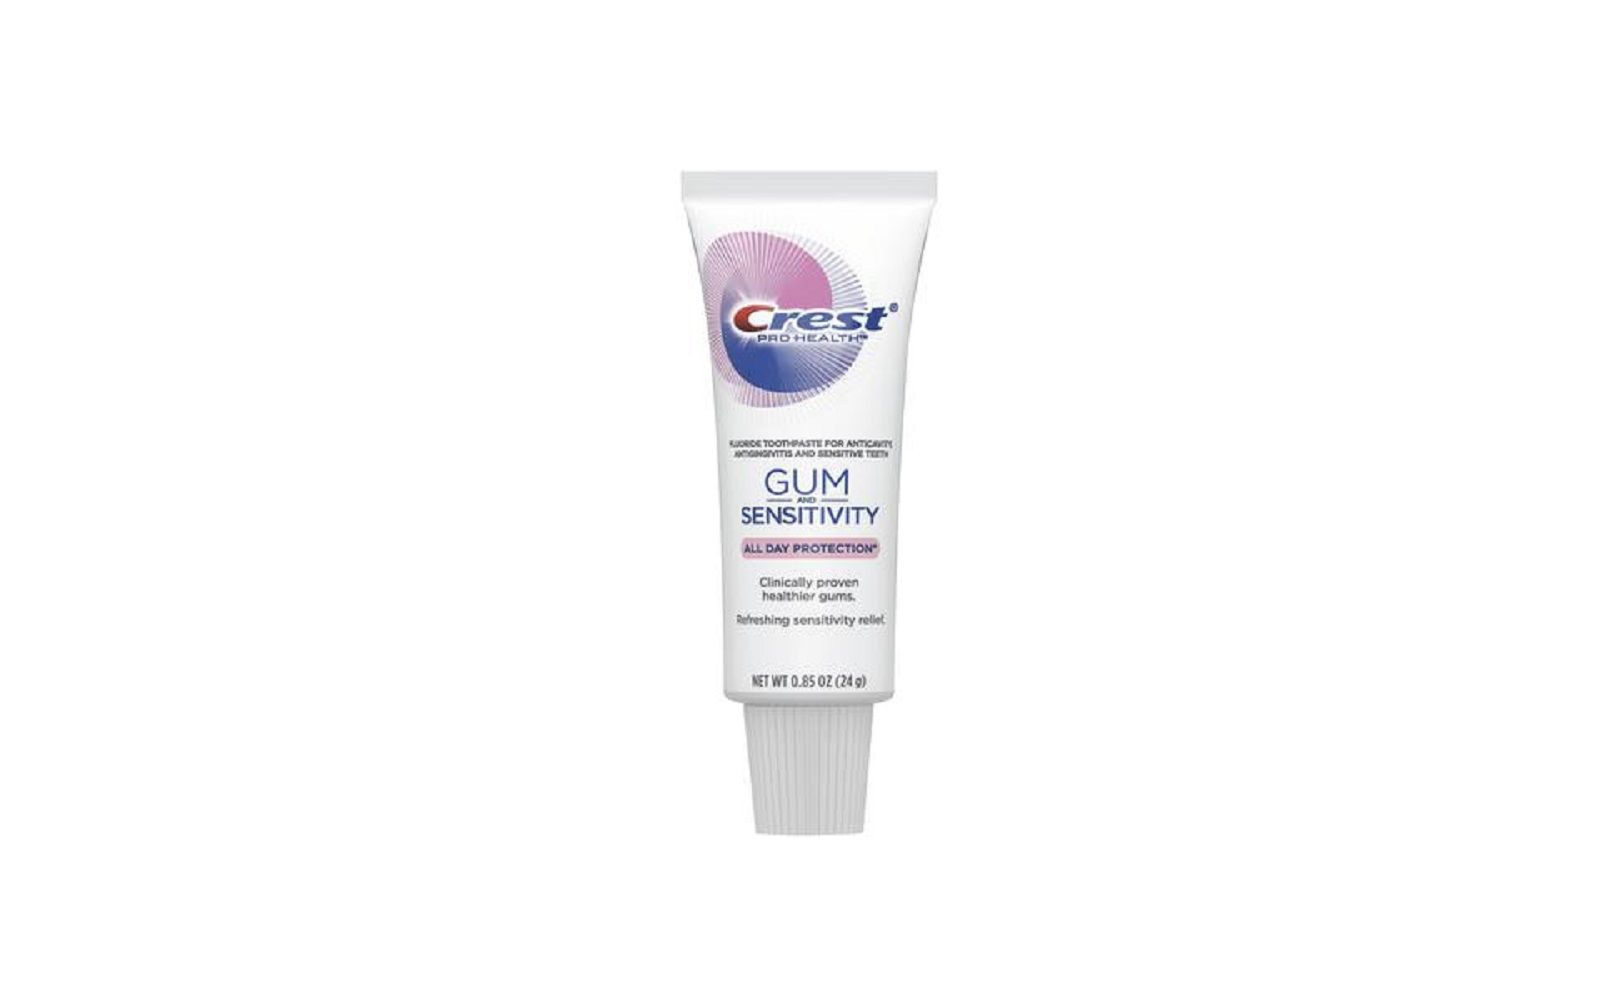 Crest® pro-health™ gum and sensitivity toothpaste - procter & gamble company